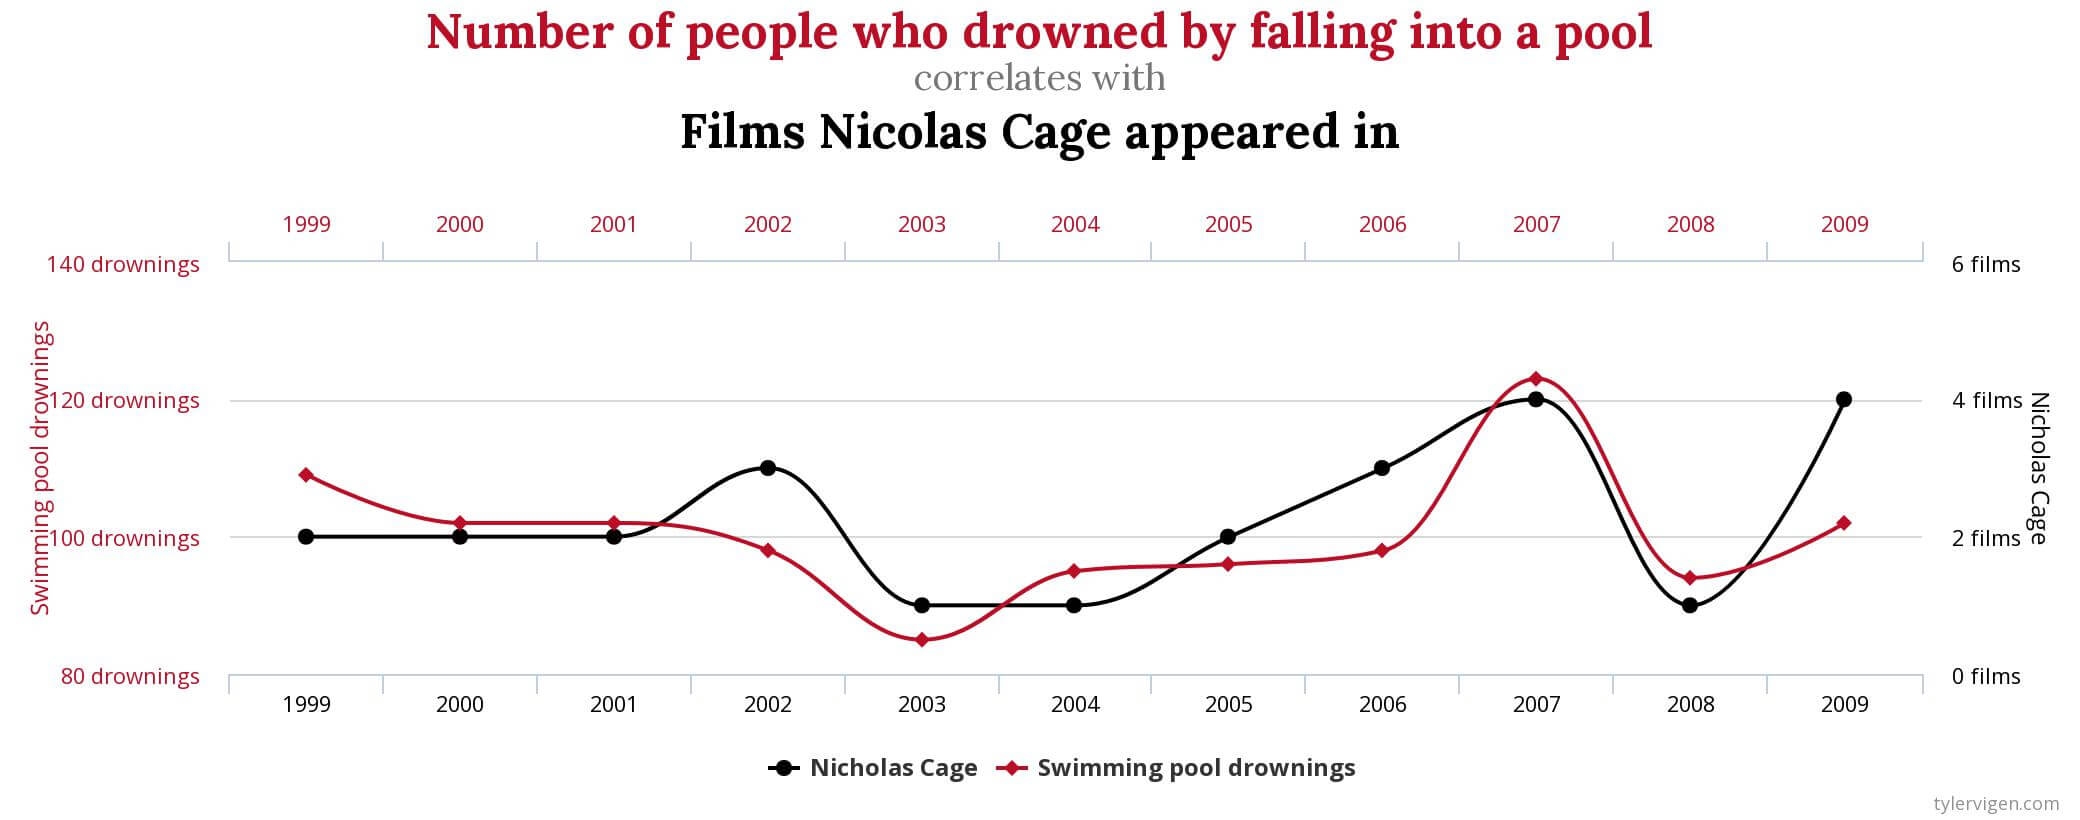 A graph showing the number of people who drowned in a pool and its correlation to the number of films Nicolas Cage has been in.